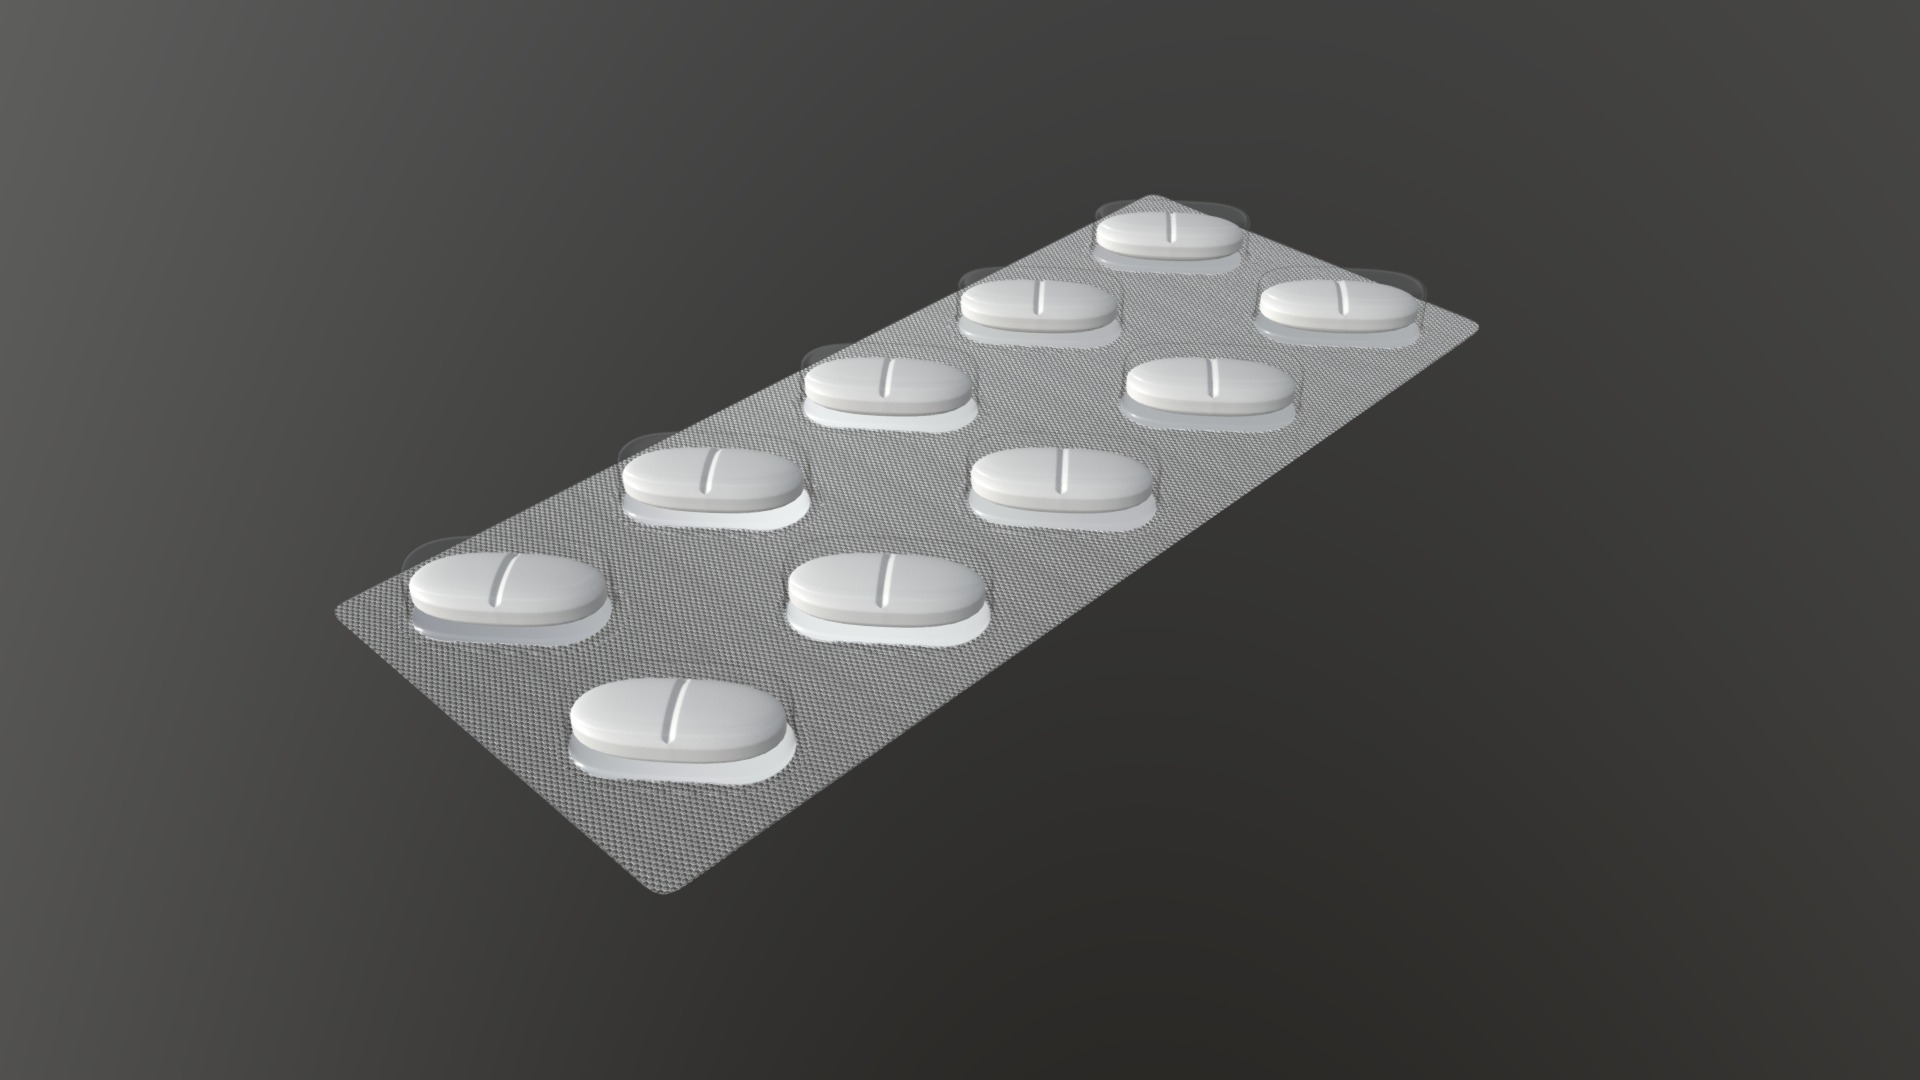 3D model pills in blister - This is a 3D model of the pills in blister. The 3D model is about a table with plates and cups on it.